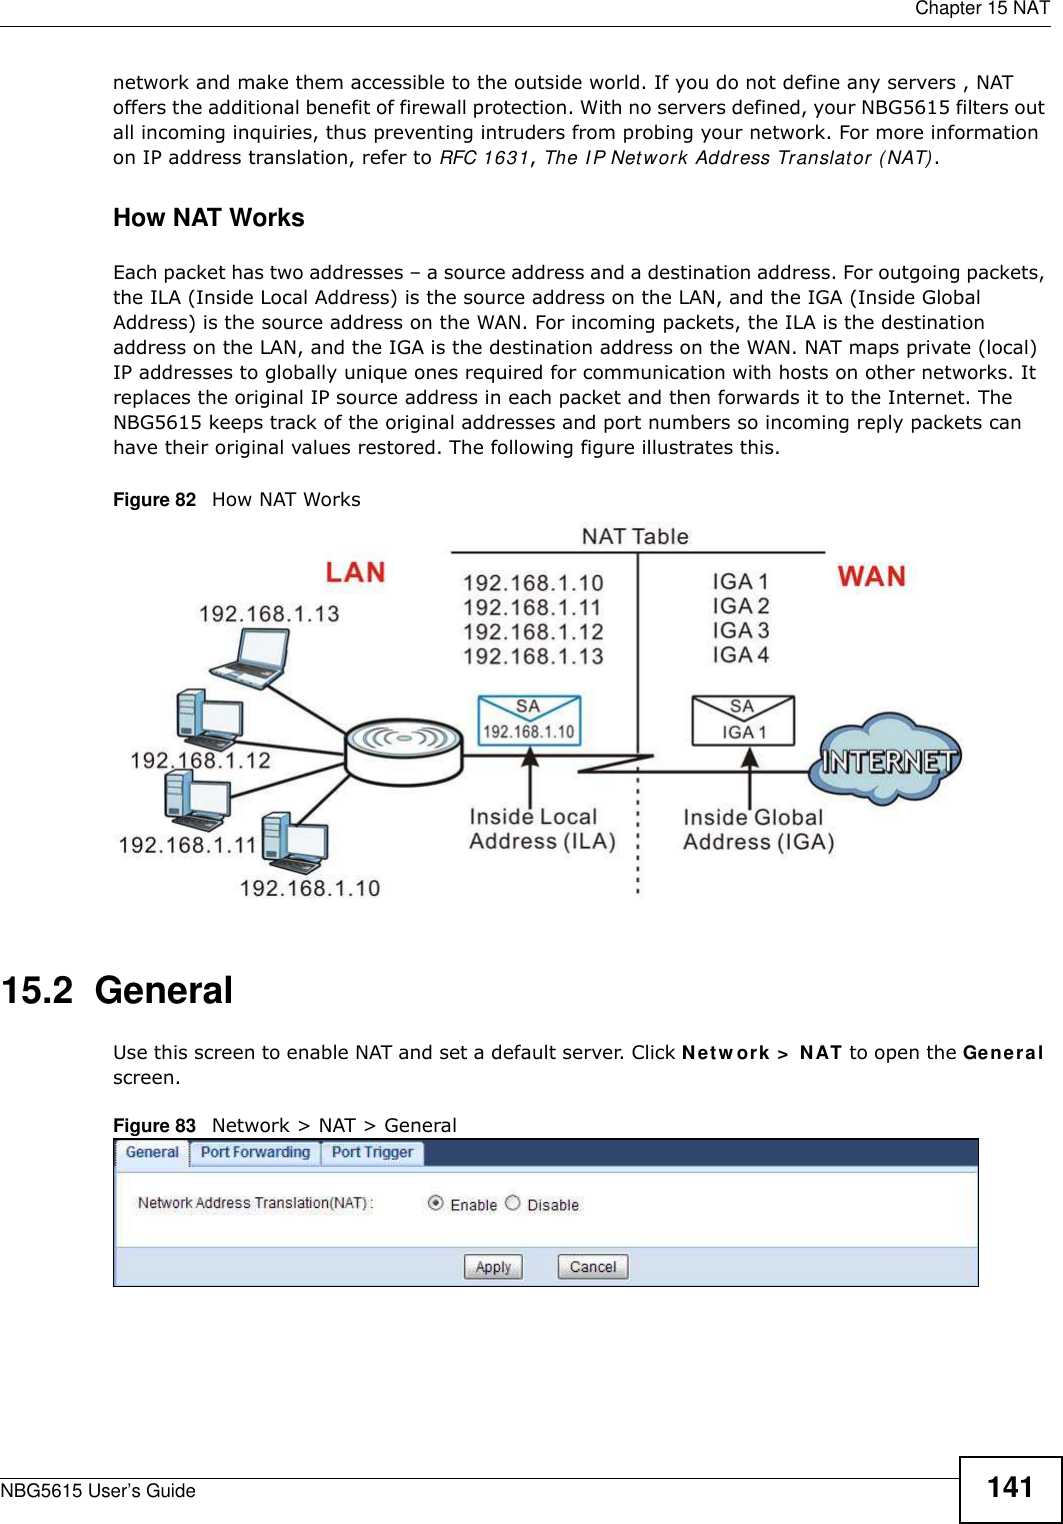  Chapter 15 NATNBG5615 User’s Guide 141network and make them accessible to the outside world. If you do not define any servers , NAT offers the additional benefit of firewall protection. With no servers defined, your NBG5615 filters out all incoming inquiries, thus preventing intruders from probing your network. For more information on IP address translation, refer to RFC 1631, The I P Network Address Translator (NAT).How NAT WorksEach packet has two addresses – a source address and a destination address. For outgoing packets, the ILA (Inside Local Address) is the source address on the LAN, and the IGA (Inside Global Address) is the source address on the WAN. For incoming packets, the ILA is the destination address on the LAN, and the IGA is the destination address on the WAN. NAT maps private (local) IP addresses to globally unique ones required for communication with hosts on other networks. It replaces the original IP source address in each packet and then forwards it to the Internet. The NBG5615 keeps track of the original addresses and port numbers so incoming reply packets can have their original values restored. The following figure illustrates this.Figure 82   How NAT Works15.2  GeneralUse this screen to enable NAT and set a default server. Click Netw ork &gt;  NAT to open the General screen.Figure 83   Network &gt; NAT &gt; General 